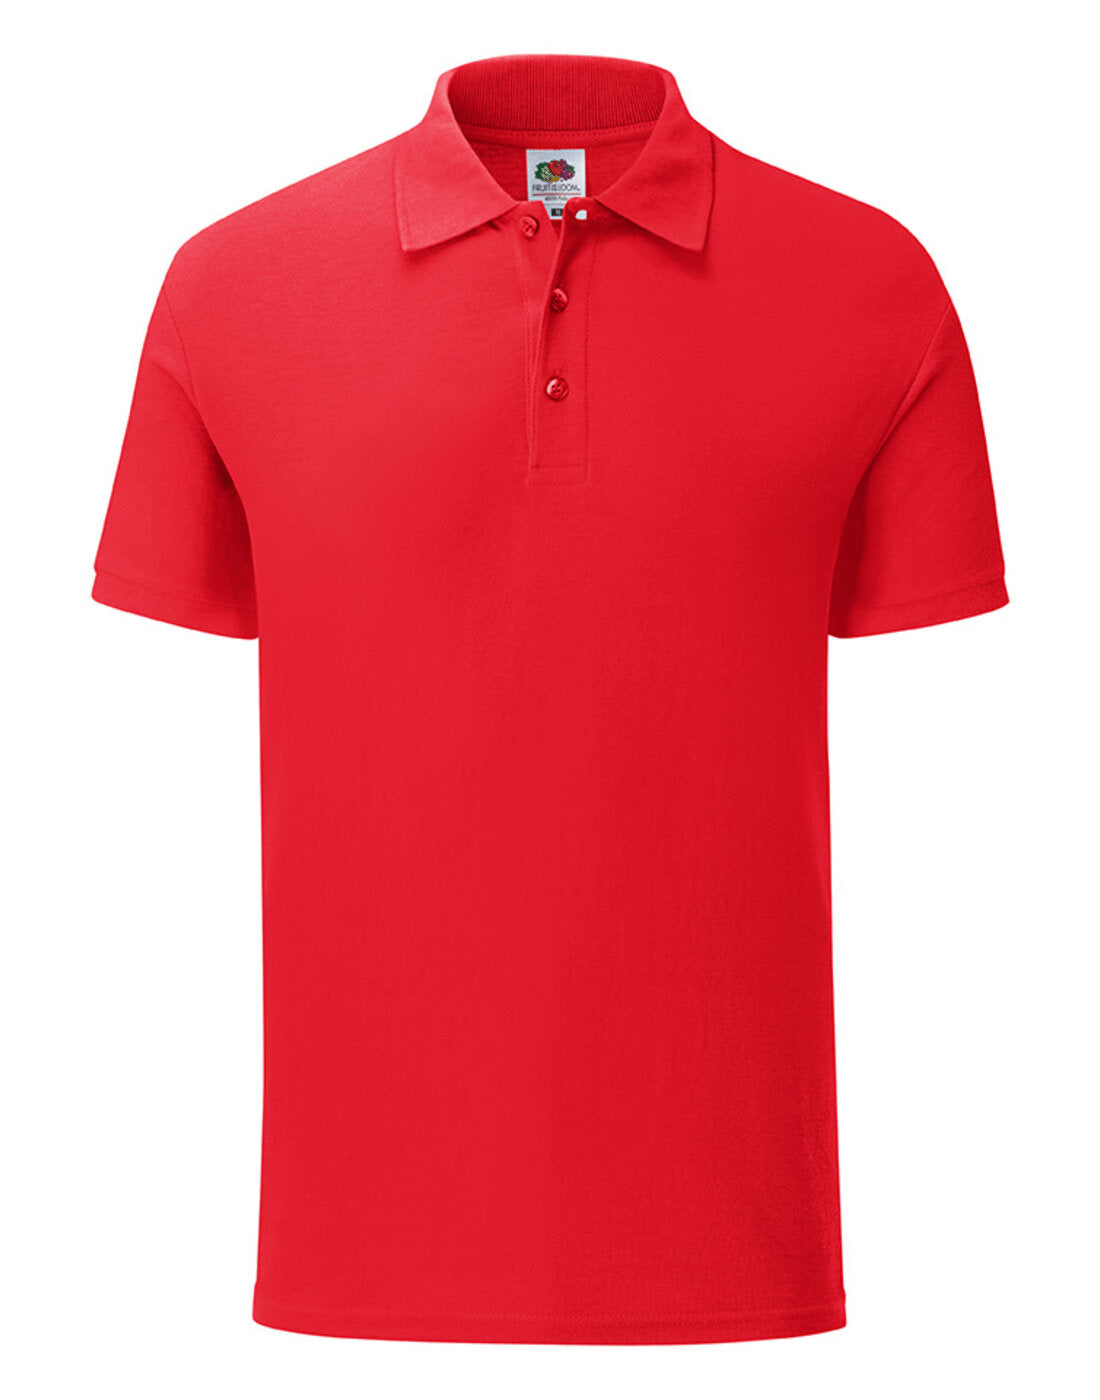 Fruit of the Loom 65/35 Tailored Fit Polo - Red